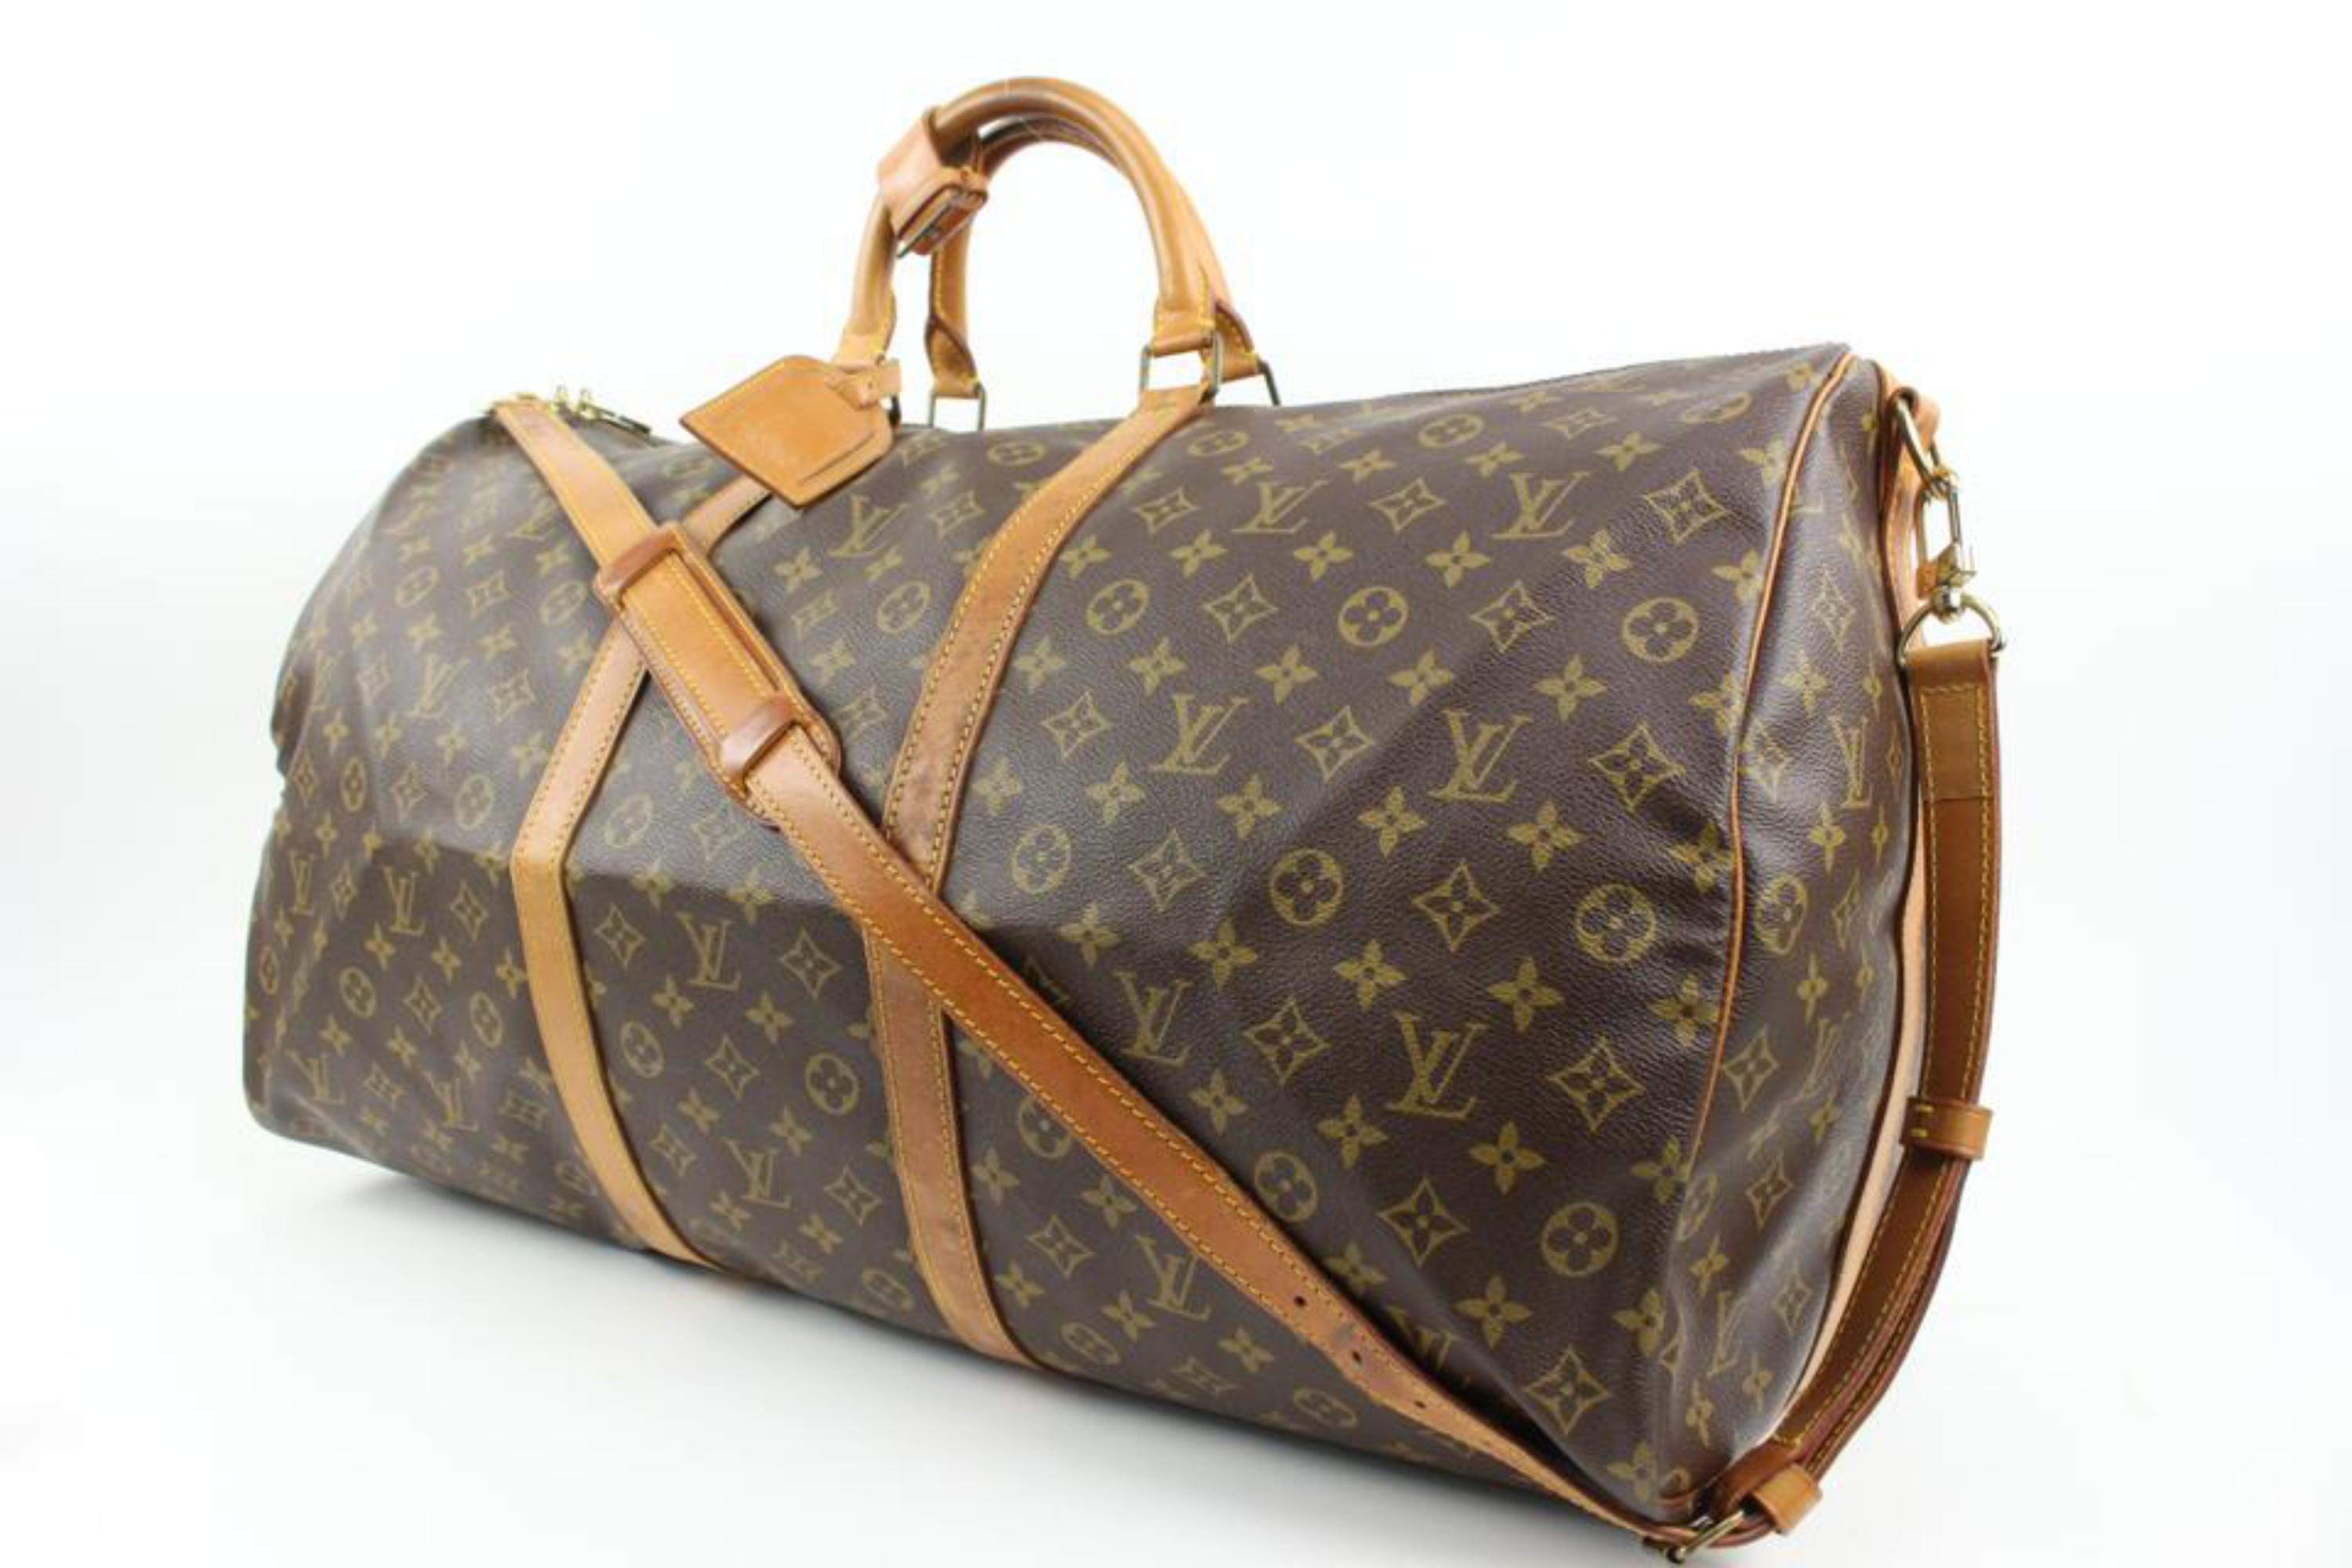 Louis Vuitton Monogram Keepall Bandouliere 60 Duffle Bag with Strap 60lv218s
Date Code/Serial Number: VI873
Made In: France
Measurements: Length:  23